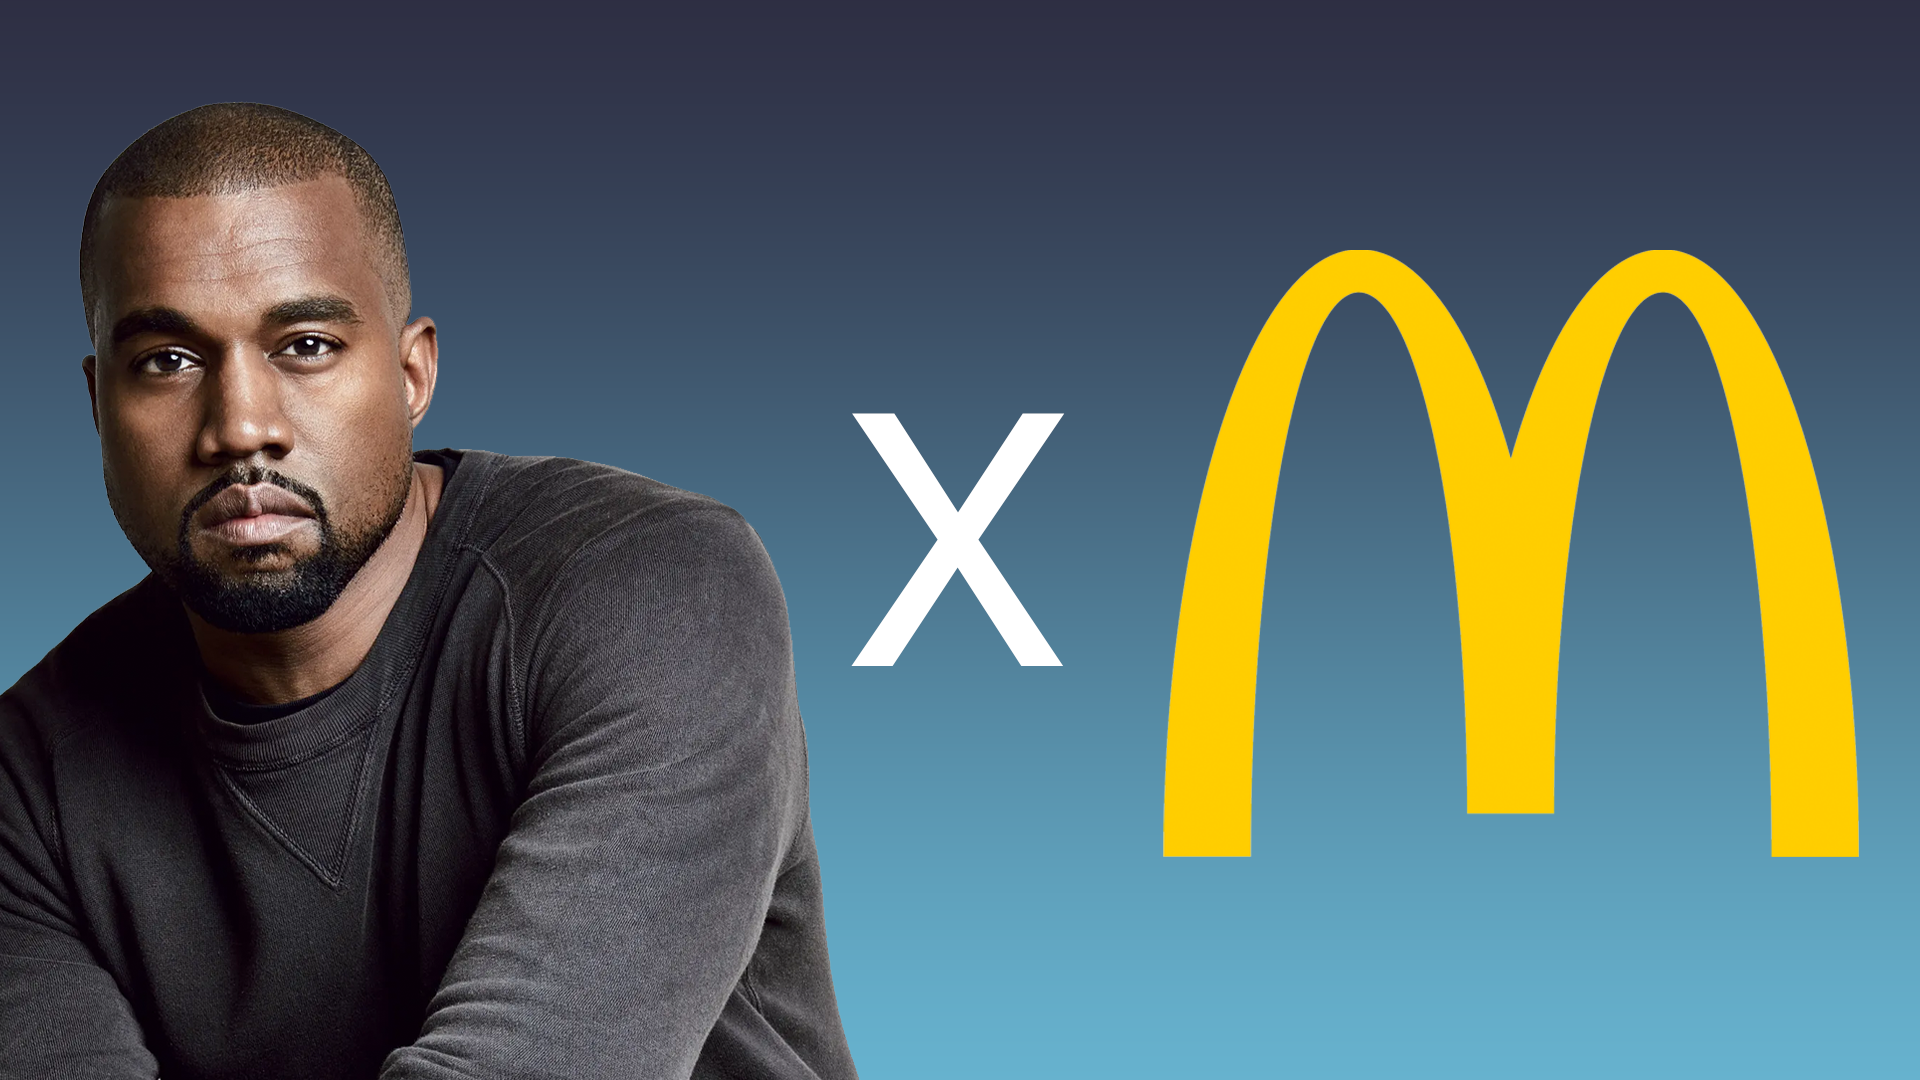 I'm not sure how to feel about Kanye West's McDonald's packaging design